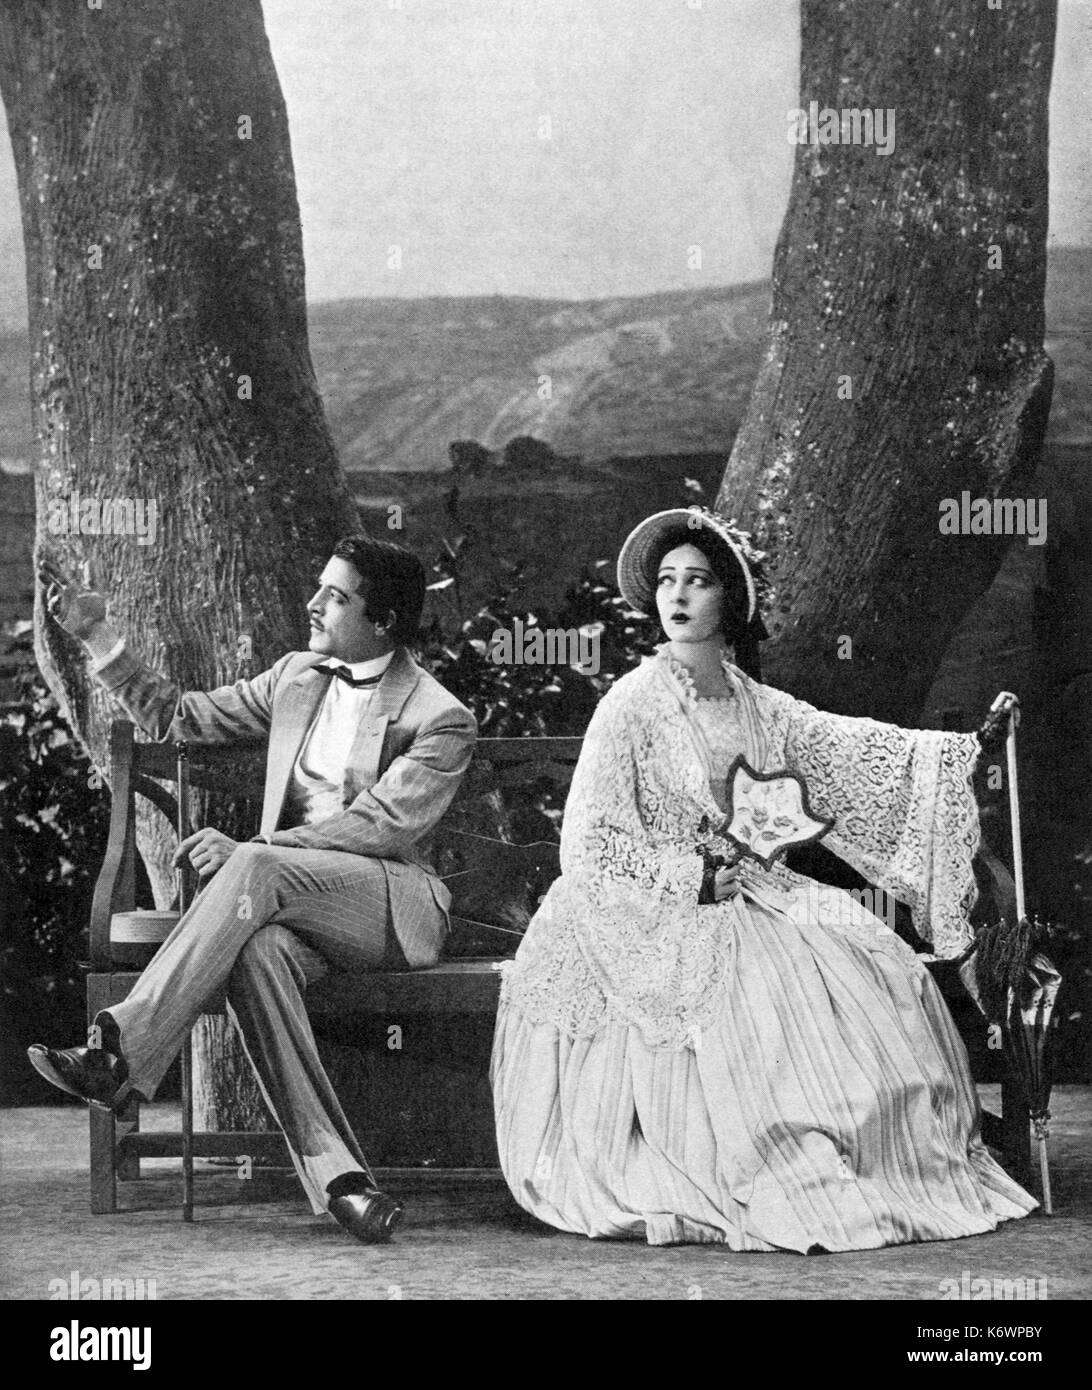 ALLA NAZIMOVA (1879-1945) Russian stage and film actress with Elliot Cabot in a 1930 production by the New York Theatre Guild of A Month In The Country by Ivan Turgenev Stock Photo